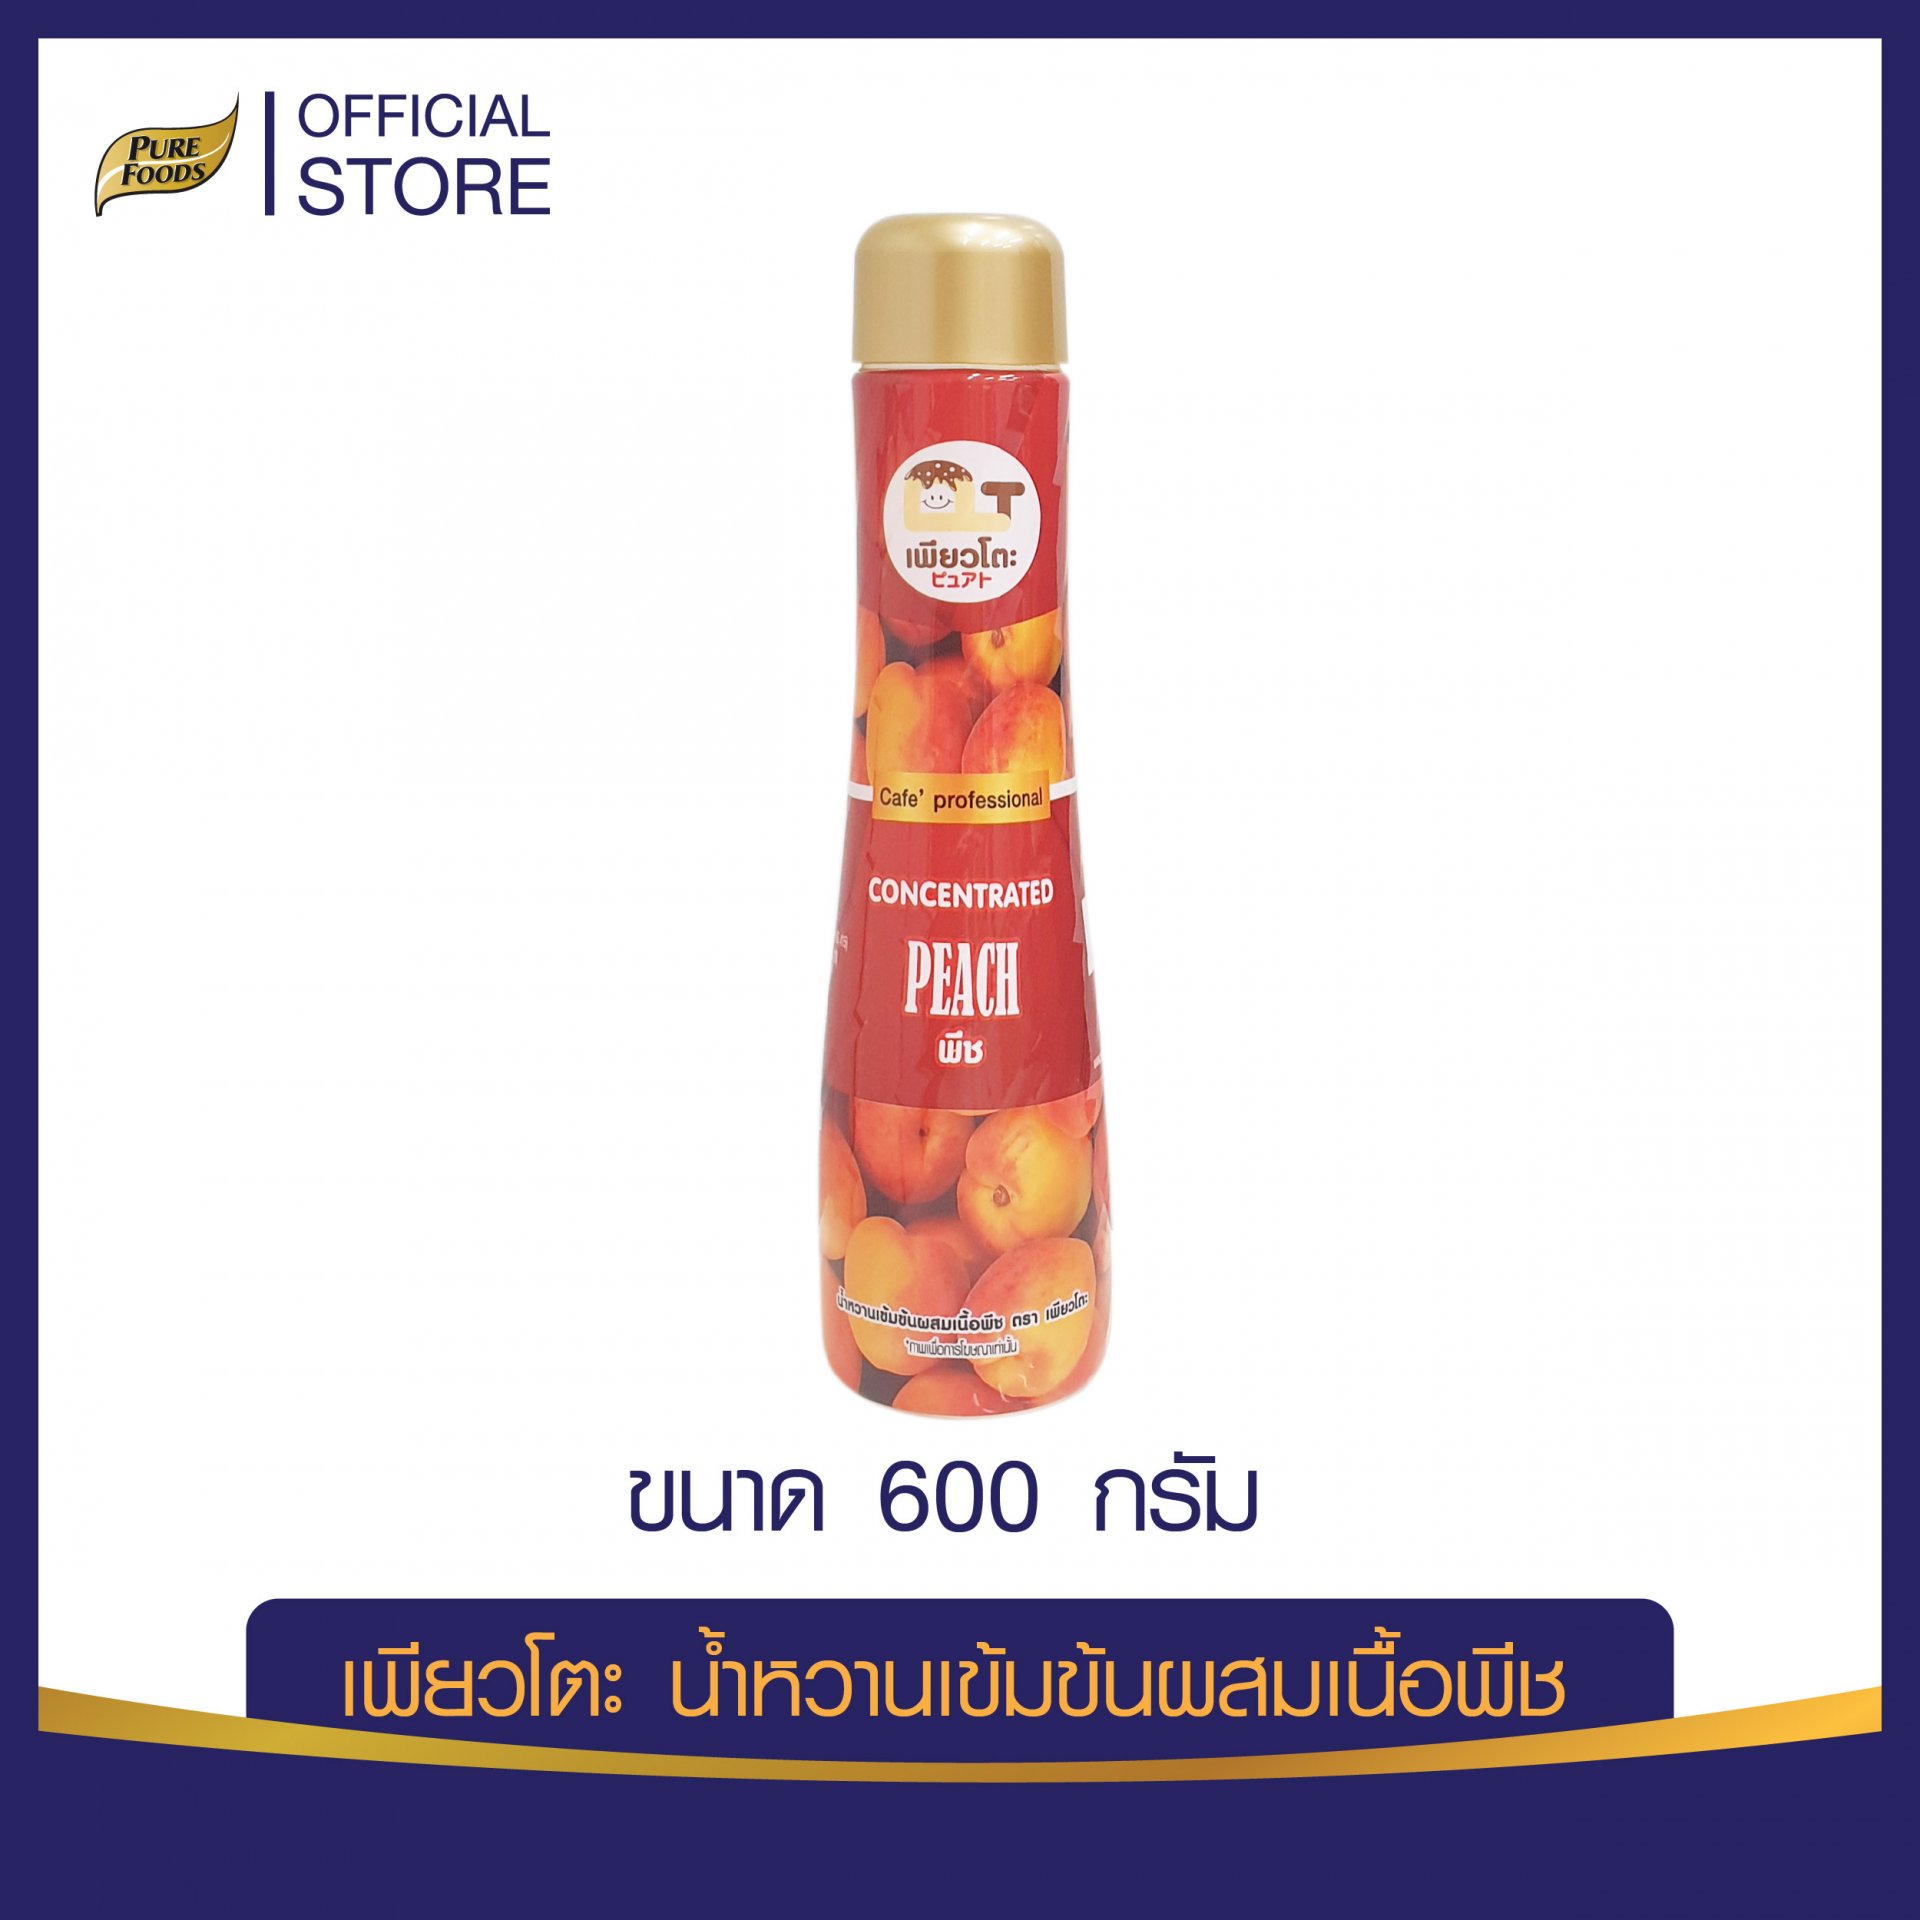 Concentrated syrup, peach flavor, Pureto brand, size 600g.